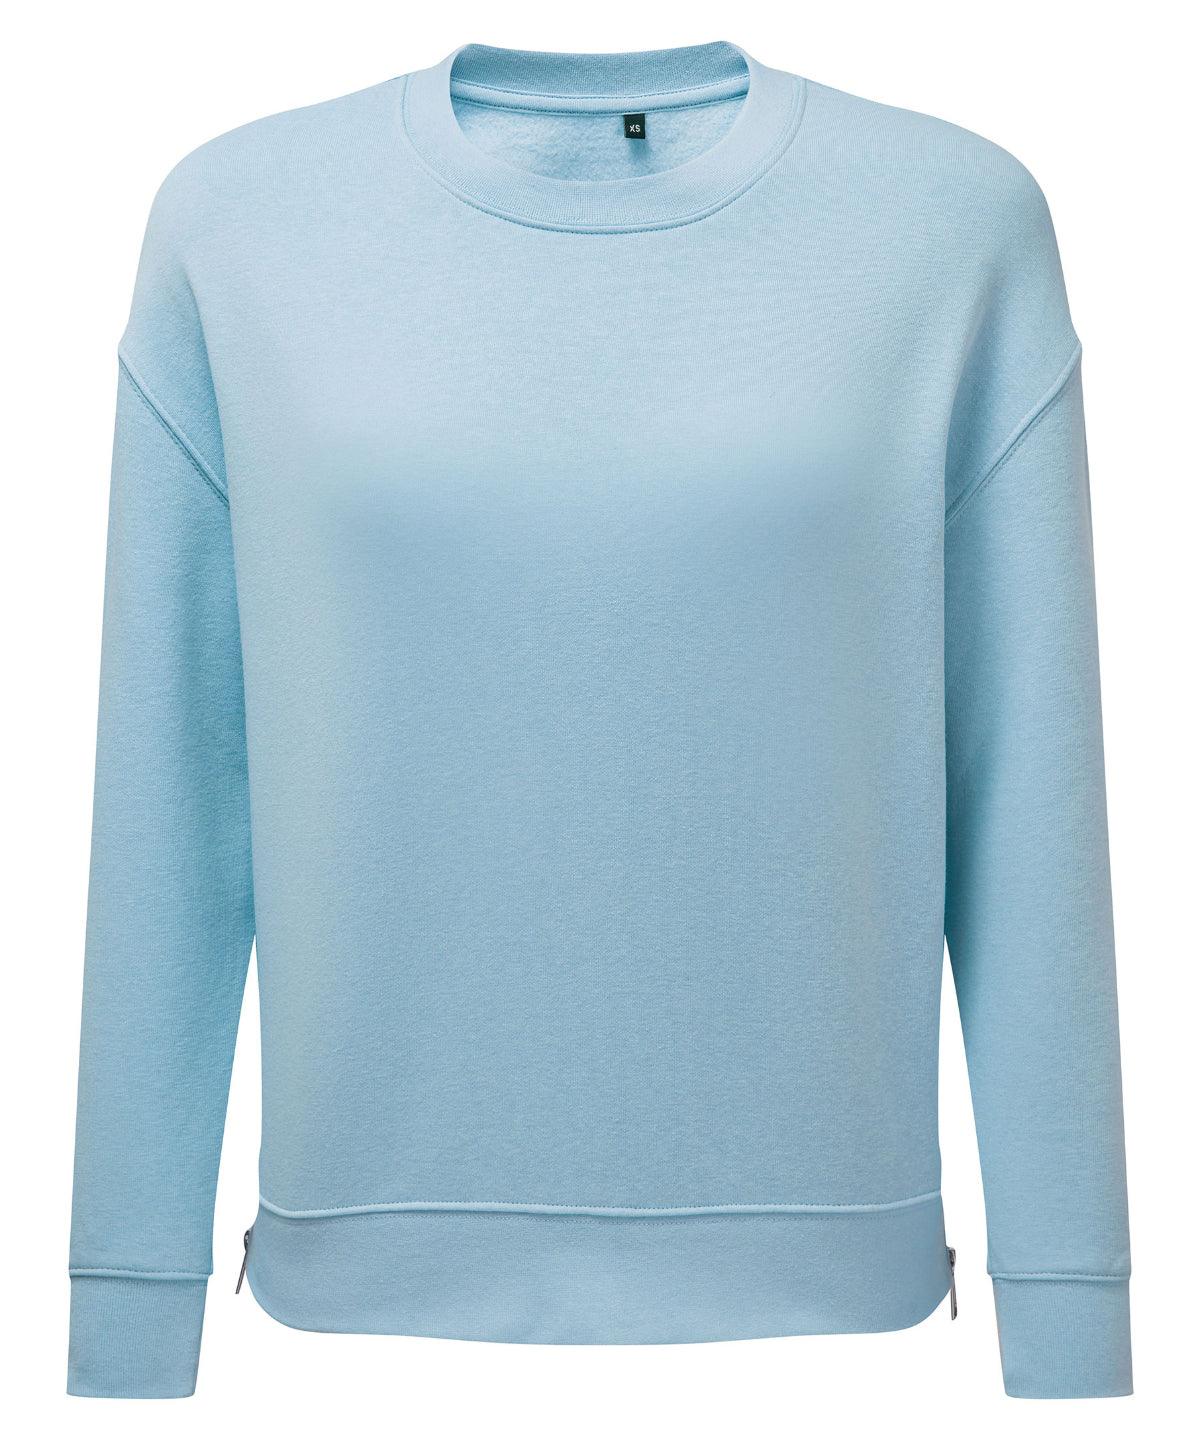 Sky Blue - Women's TriDri® Recycled Chill Zip Sweatshirt Sweatshirts TriDri® Activewear & Performance, Back to the Gym, Exclusives, New Styles For 2022, Women's Fashion Schoolwear Centres